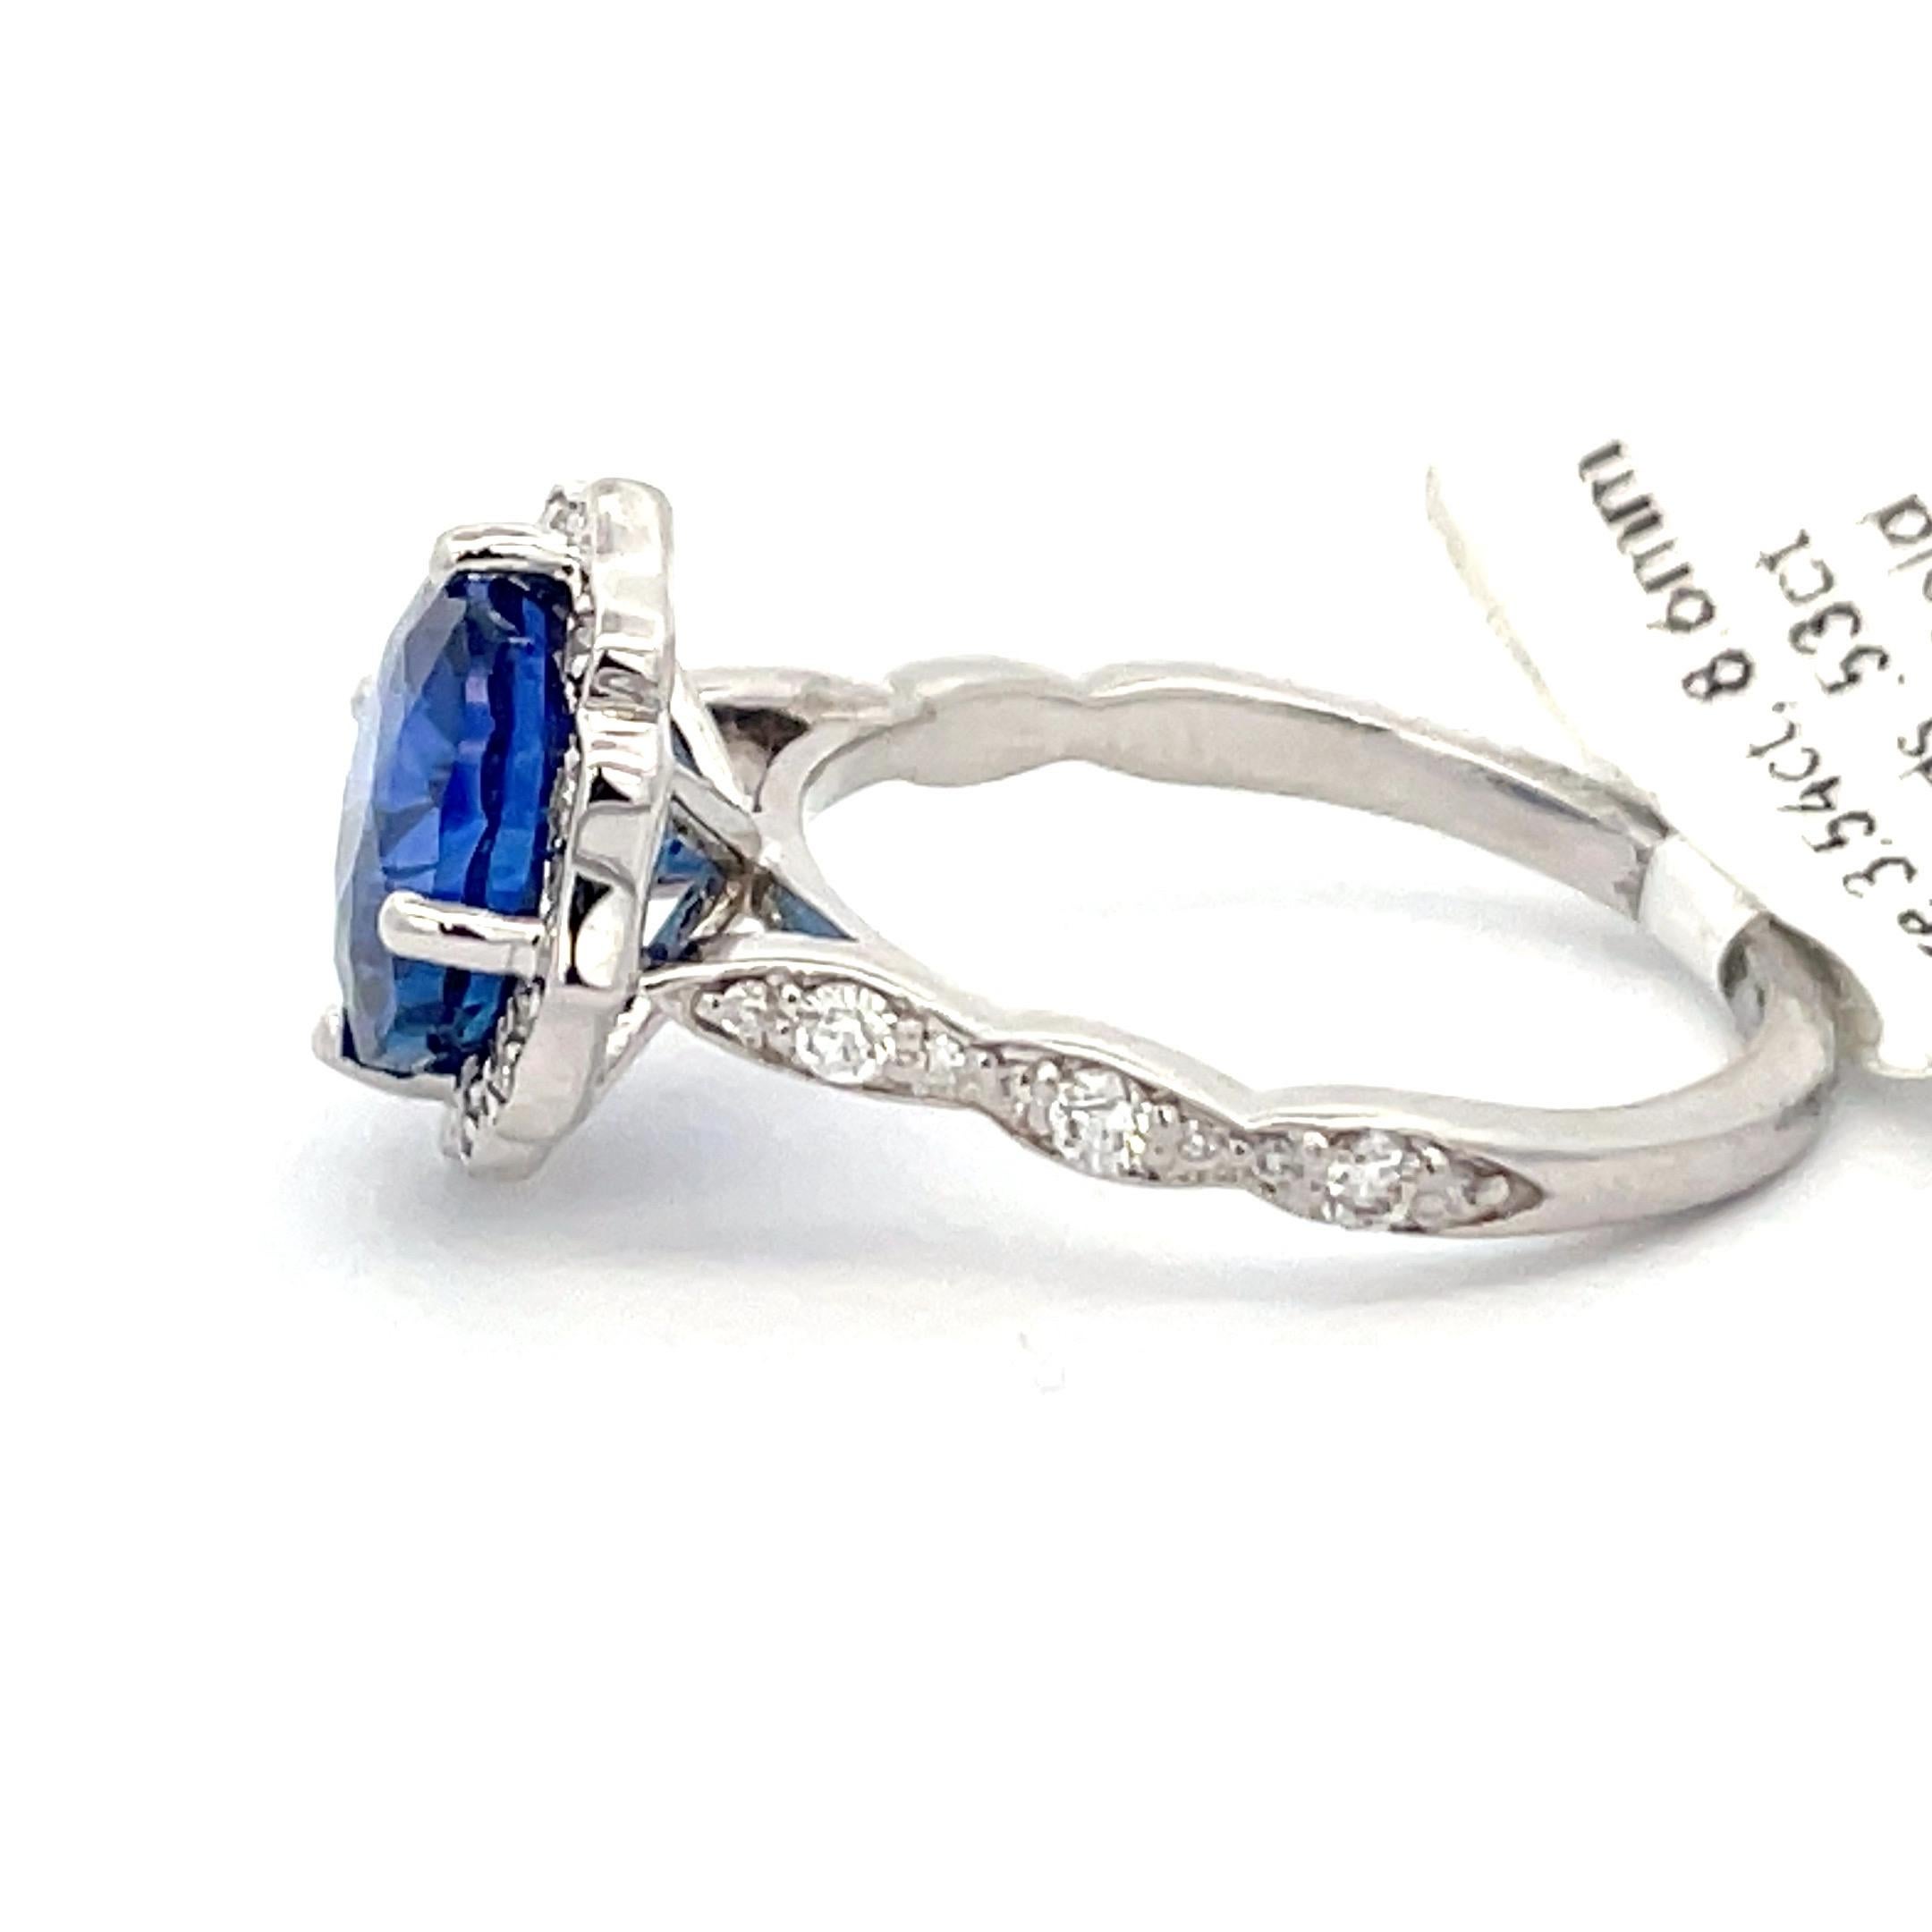 Contemporary Antique Inspired Sapphire Diamond Halo Ring 4.07 Carats 14 Karat White Gold For Sale